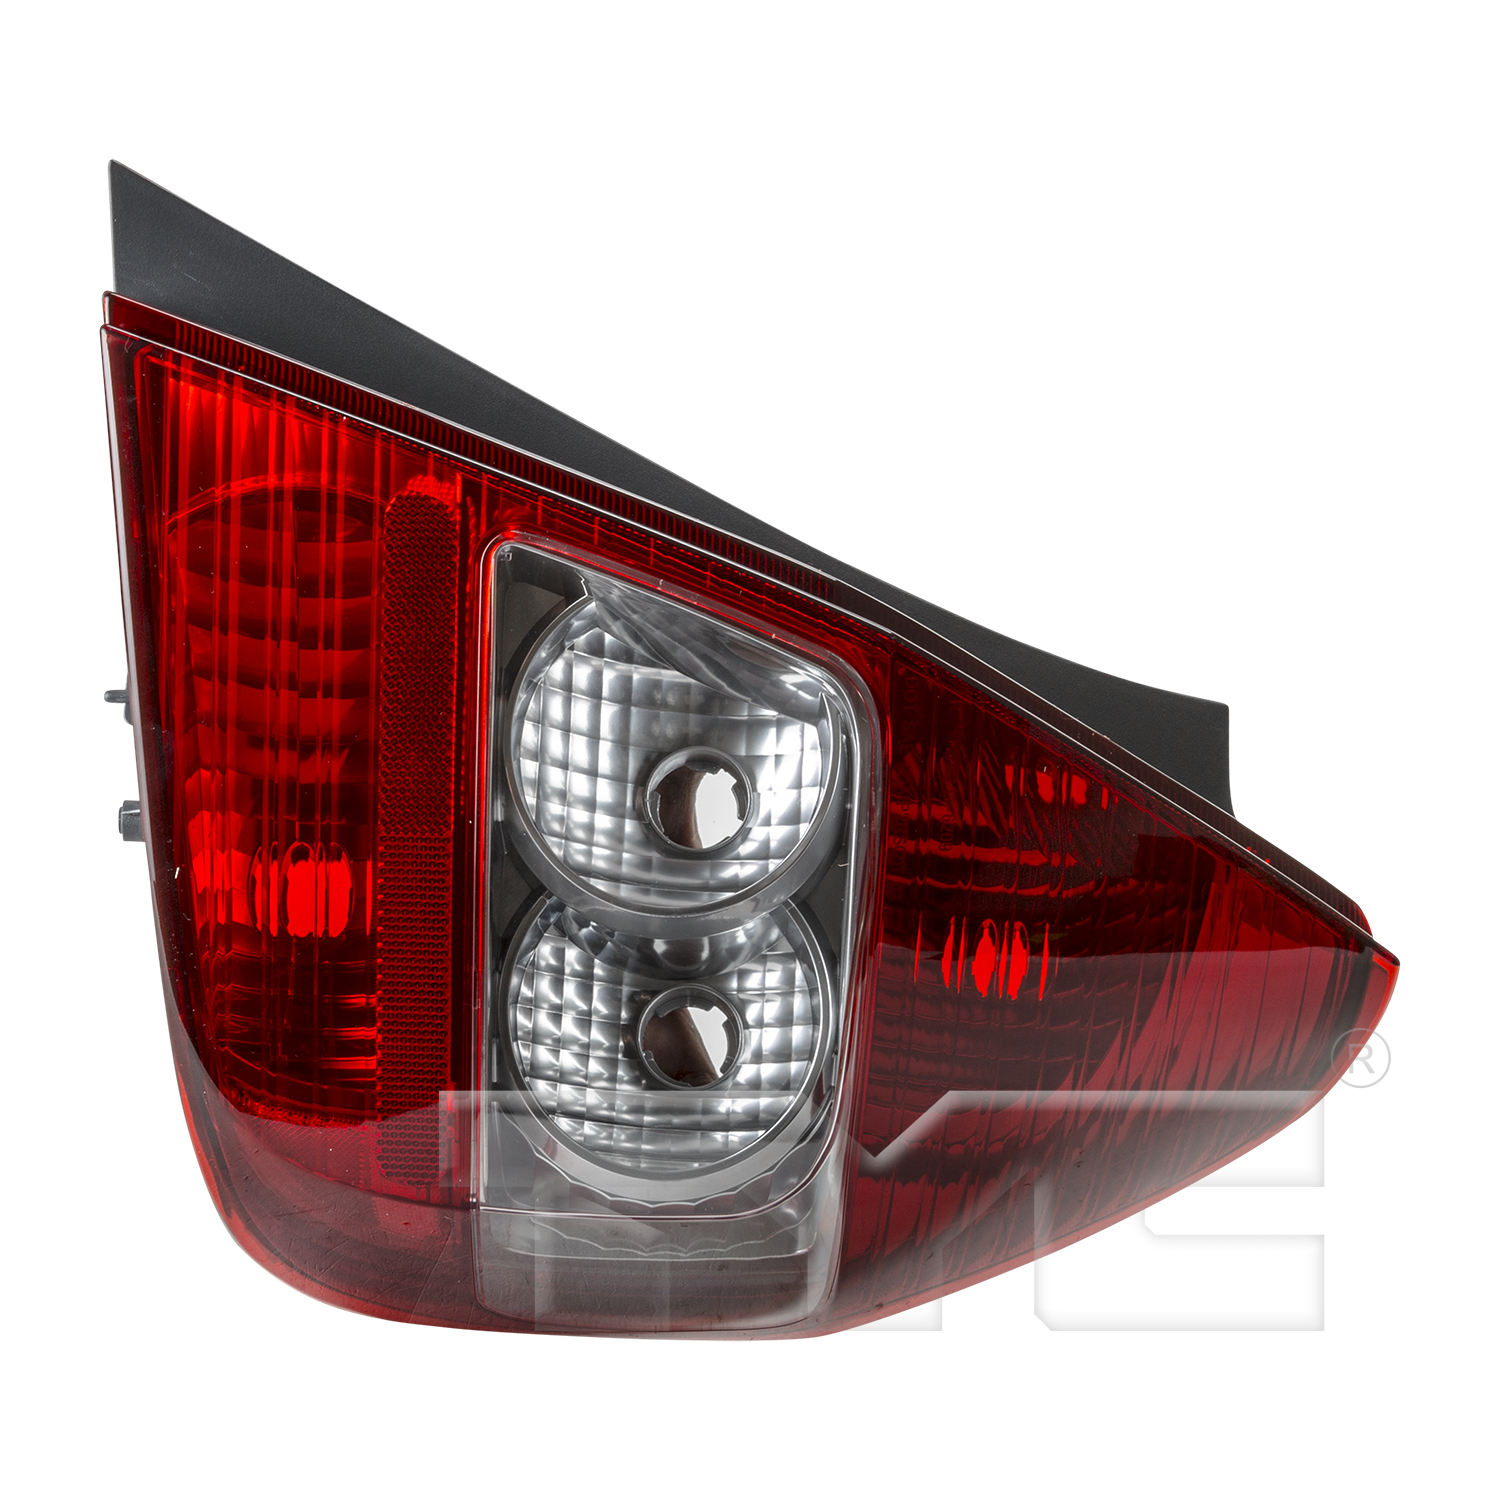 Aftermarket TAILLIGHTS for HONDA - FIT, FIT,07-08,RT Taillamp lens/housing